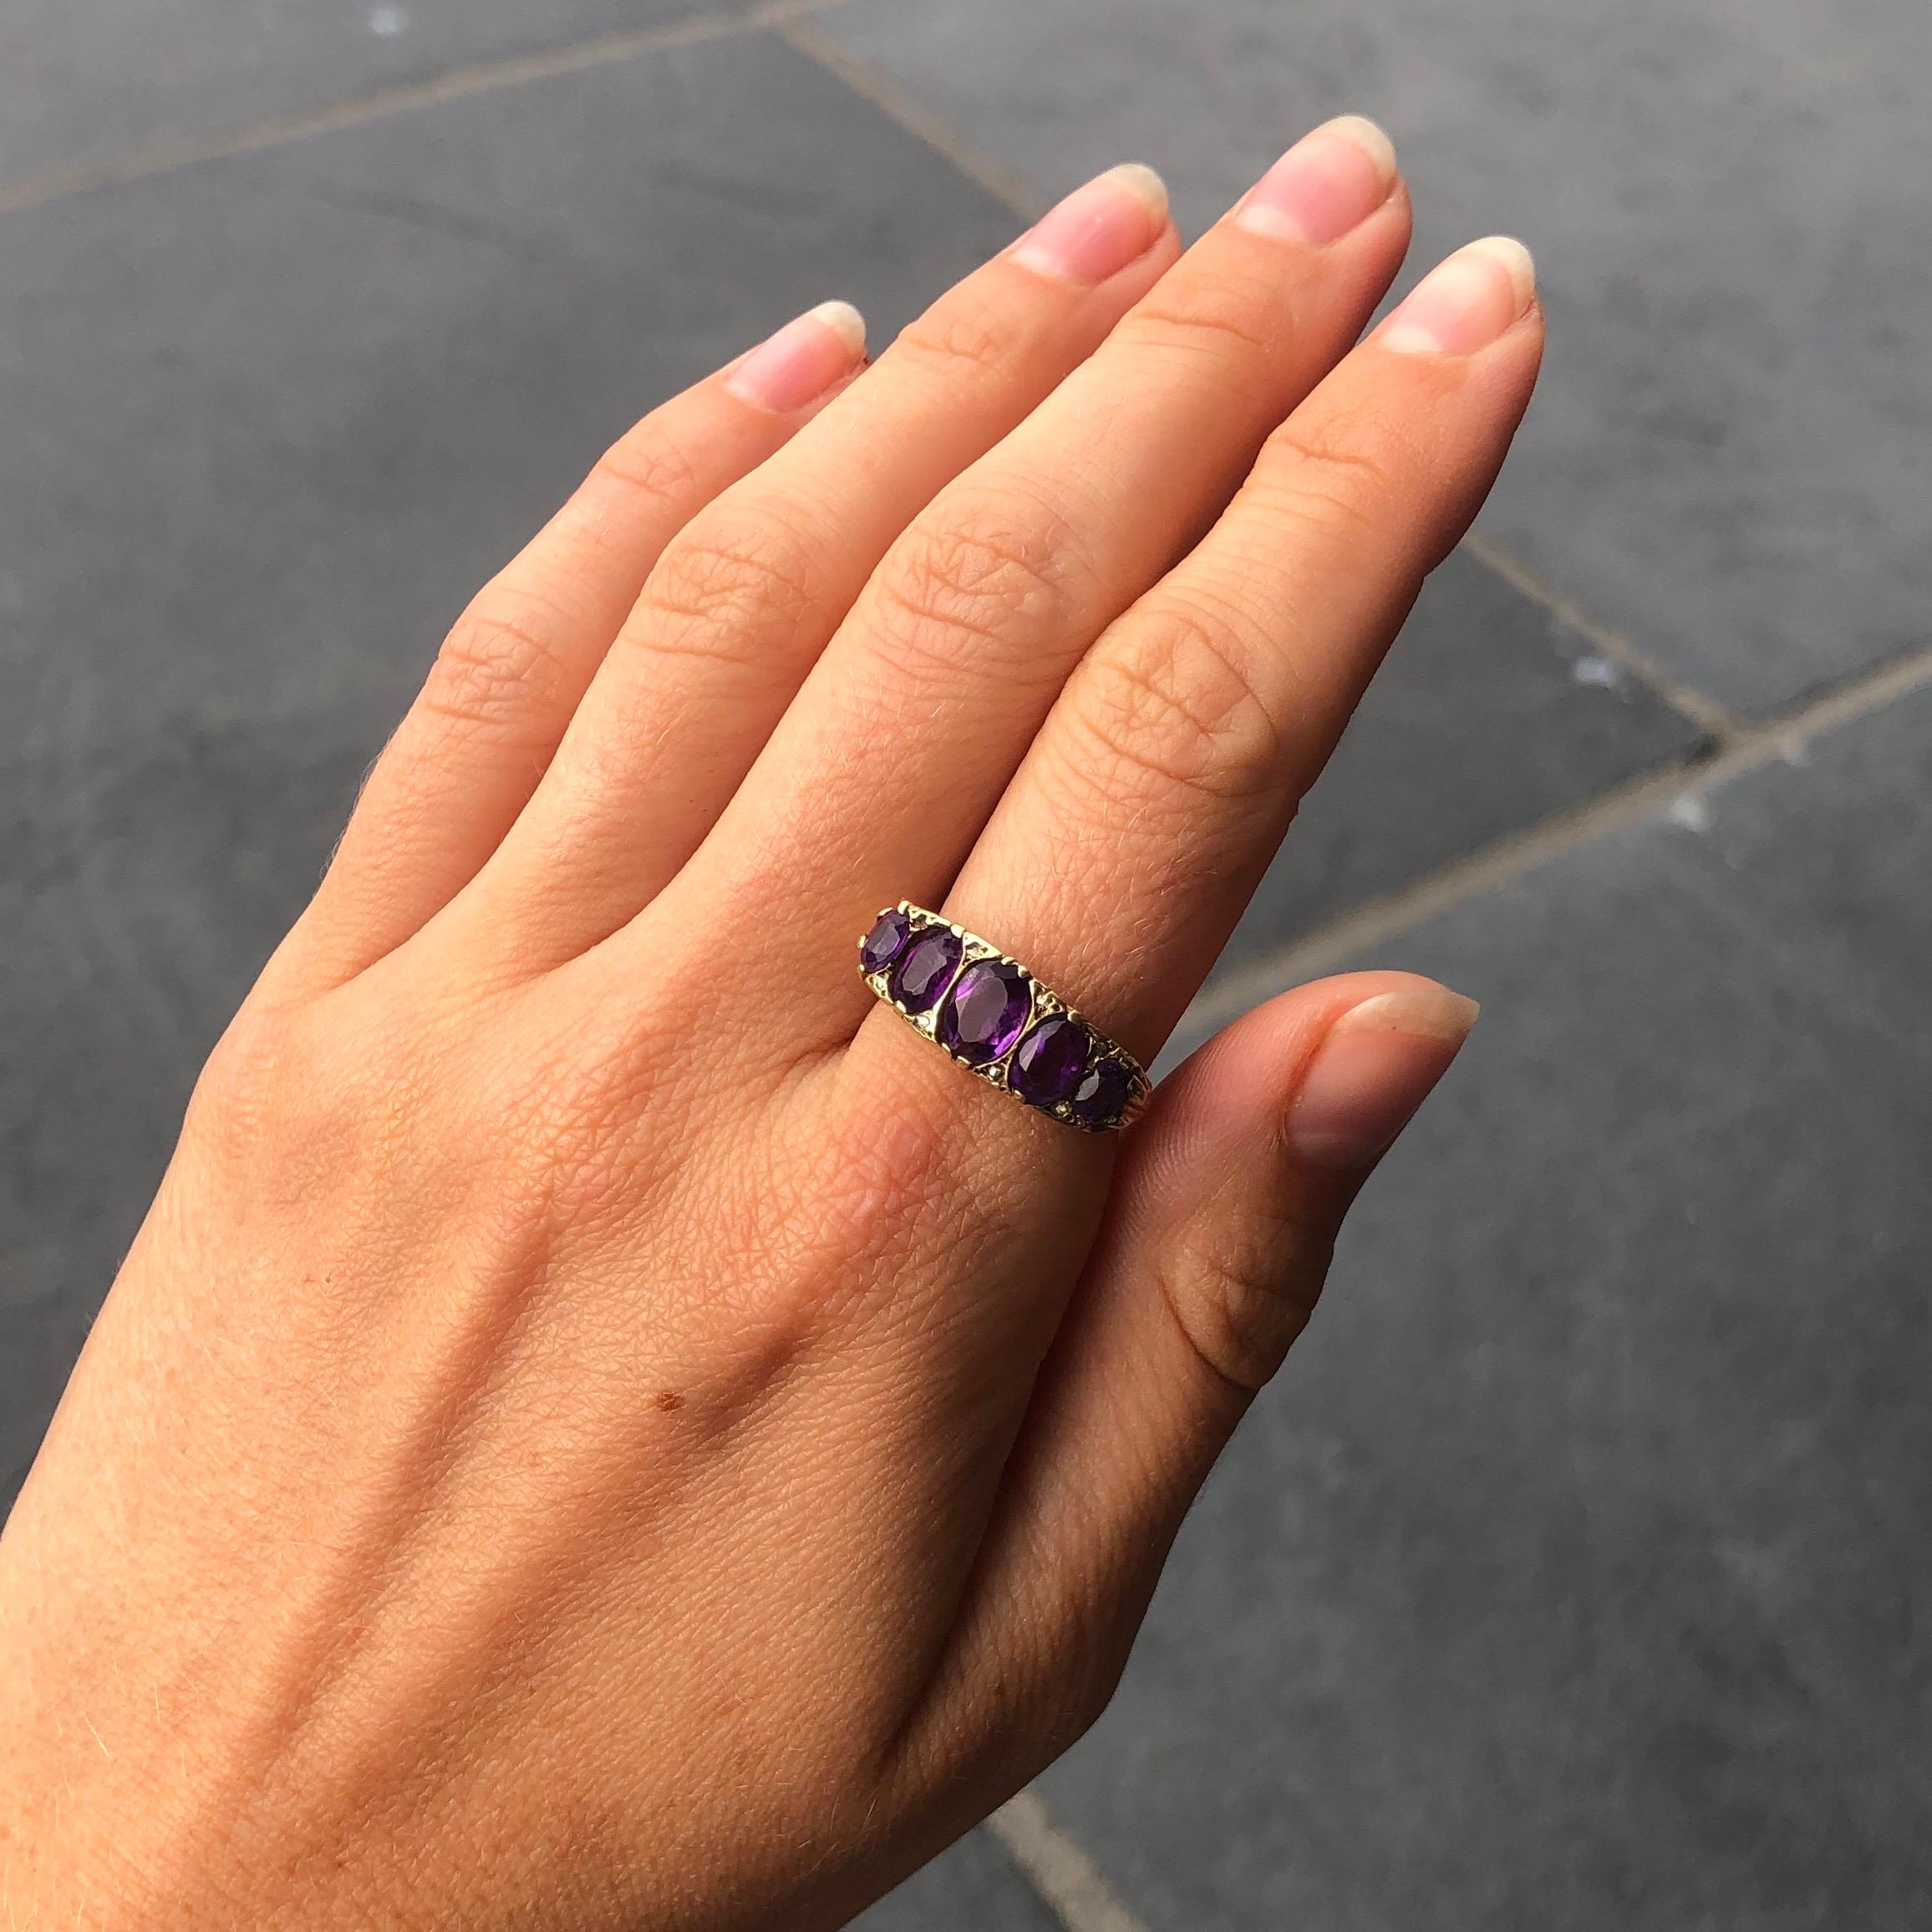 Women's Vintage Amethyst Five-Stone with Diamond Points Modelled in 9 Carat Gold